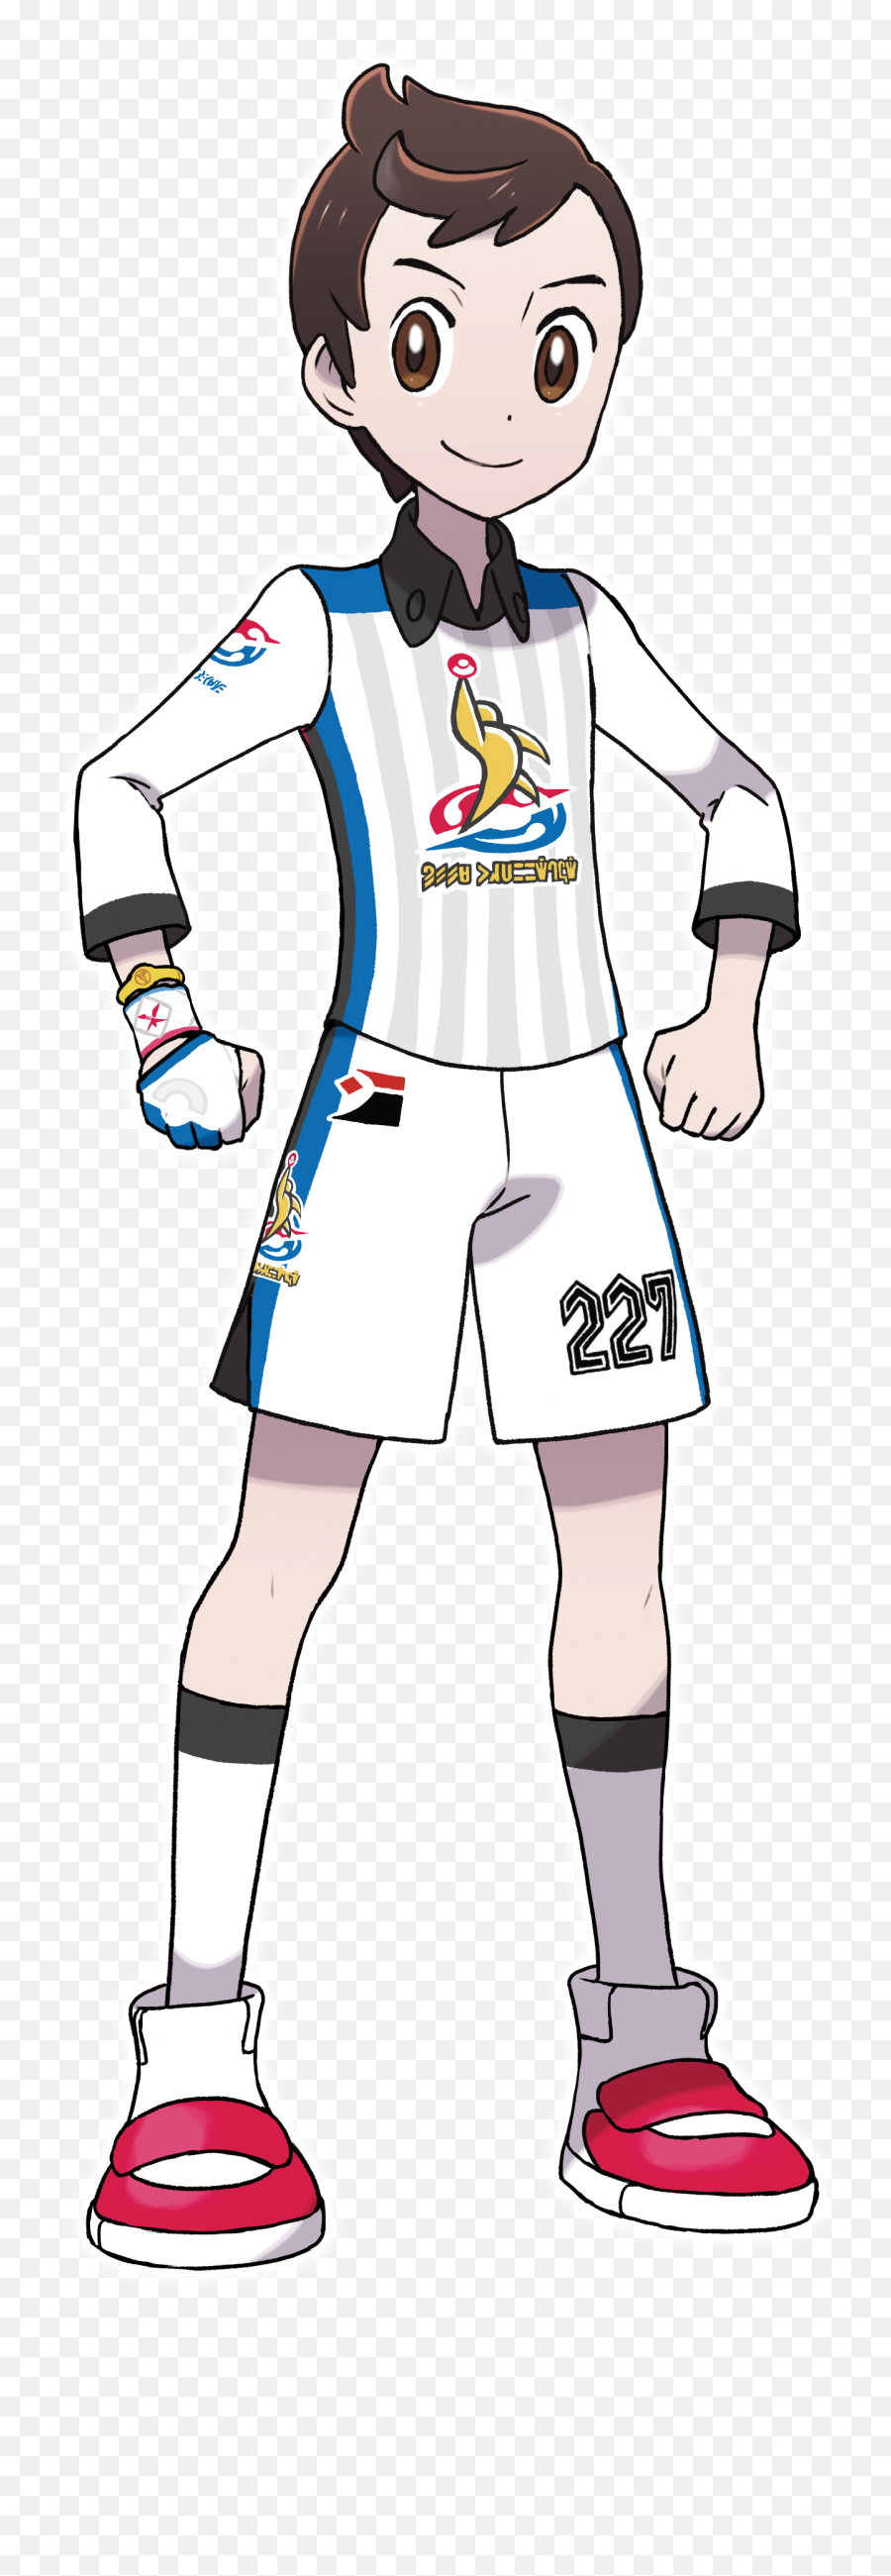 Male Protagonist Sword - Pokemon Gym Uniform Png,Sword And Shield Png